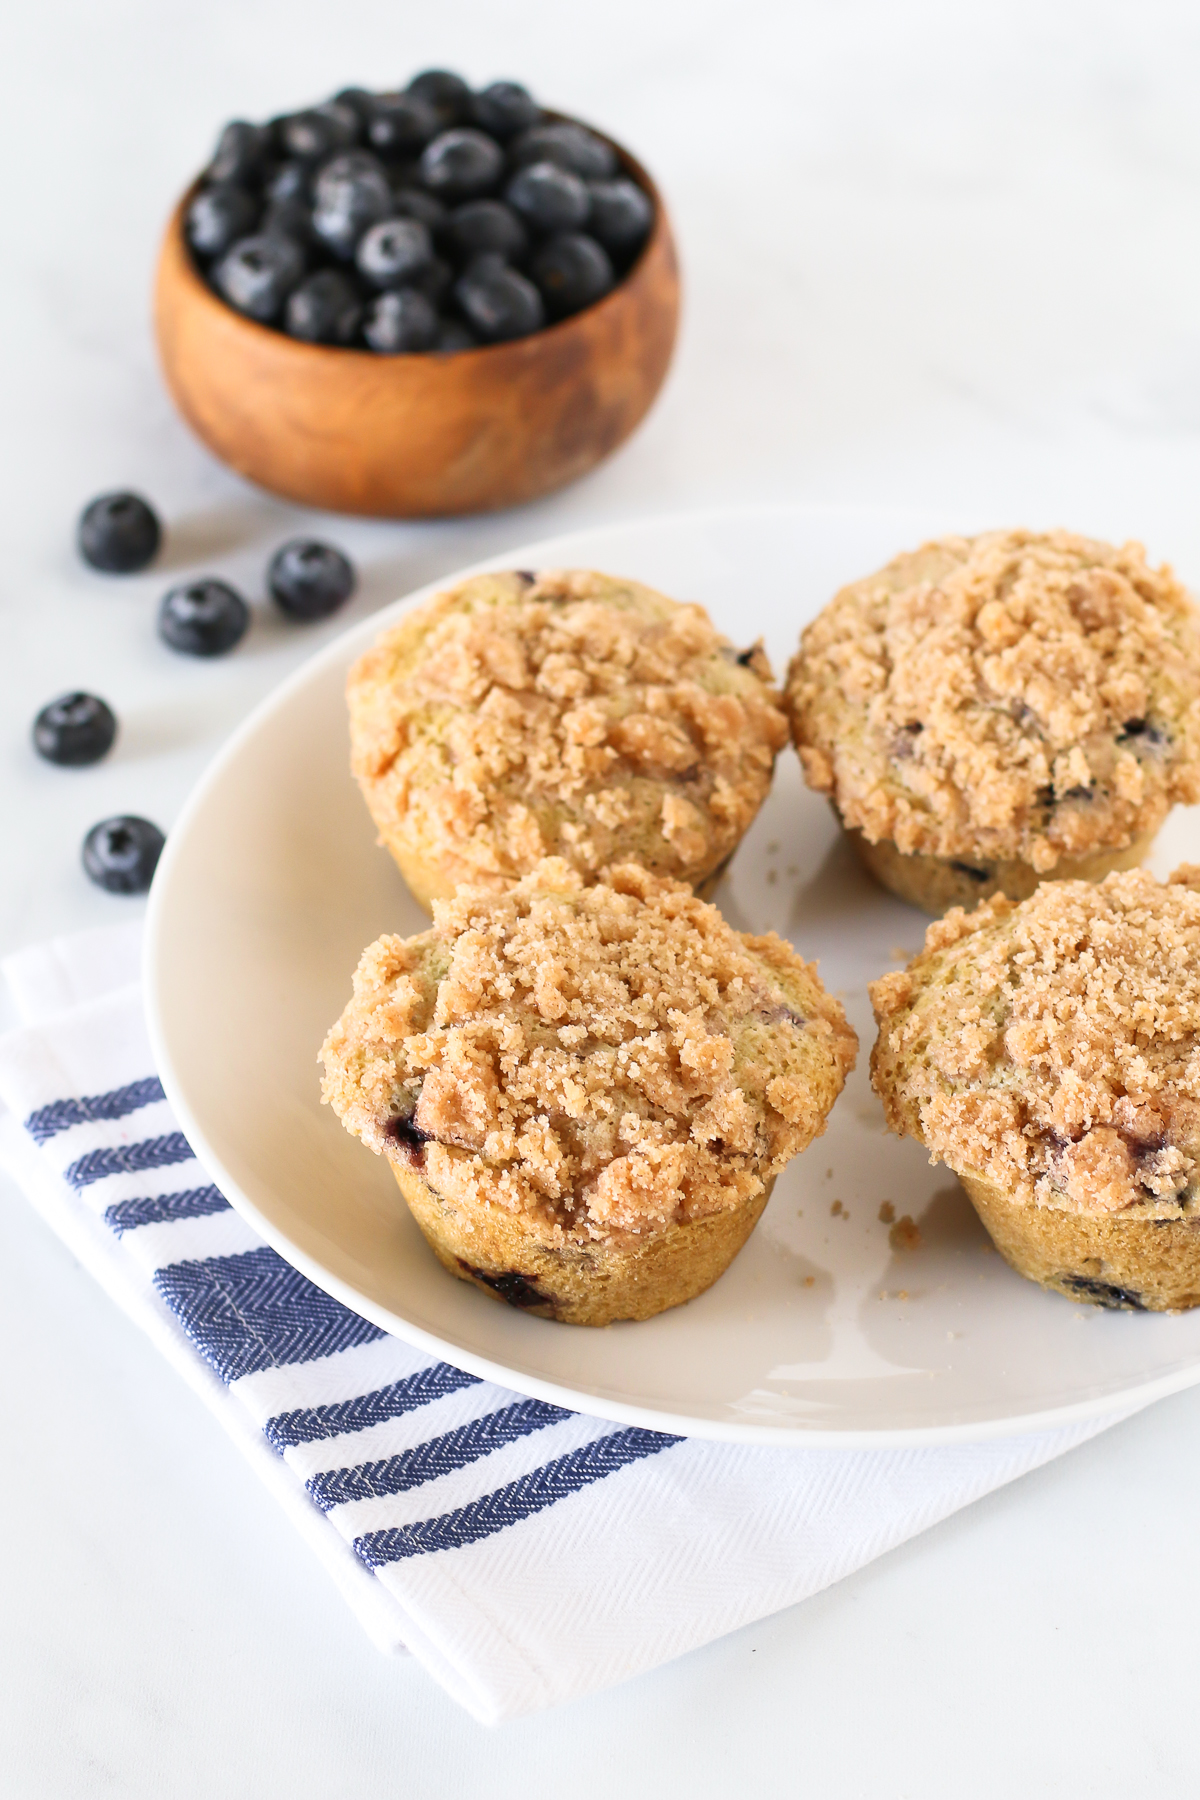 Gluten Free Vegan Blueberry Crumb Muffins. The beautiful cinnamon crumb topping makes these blueberry muffins simply delightful!